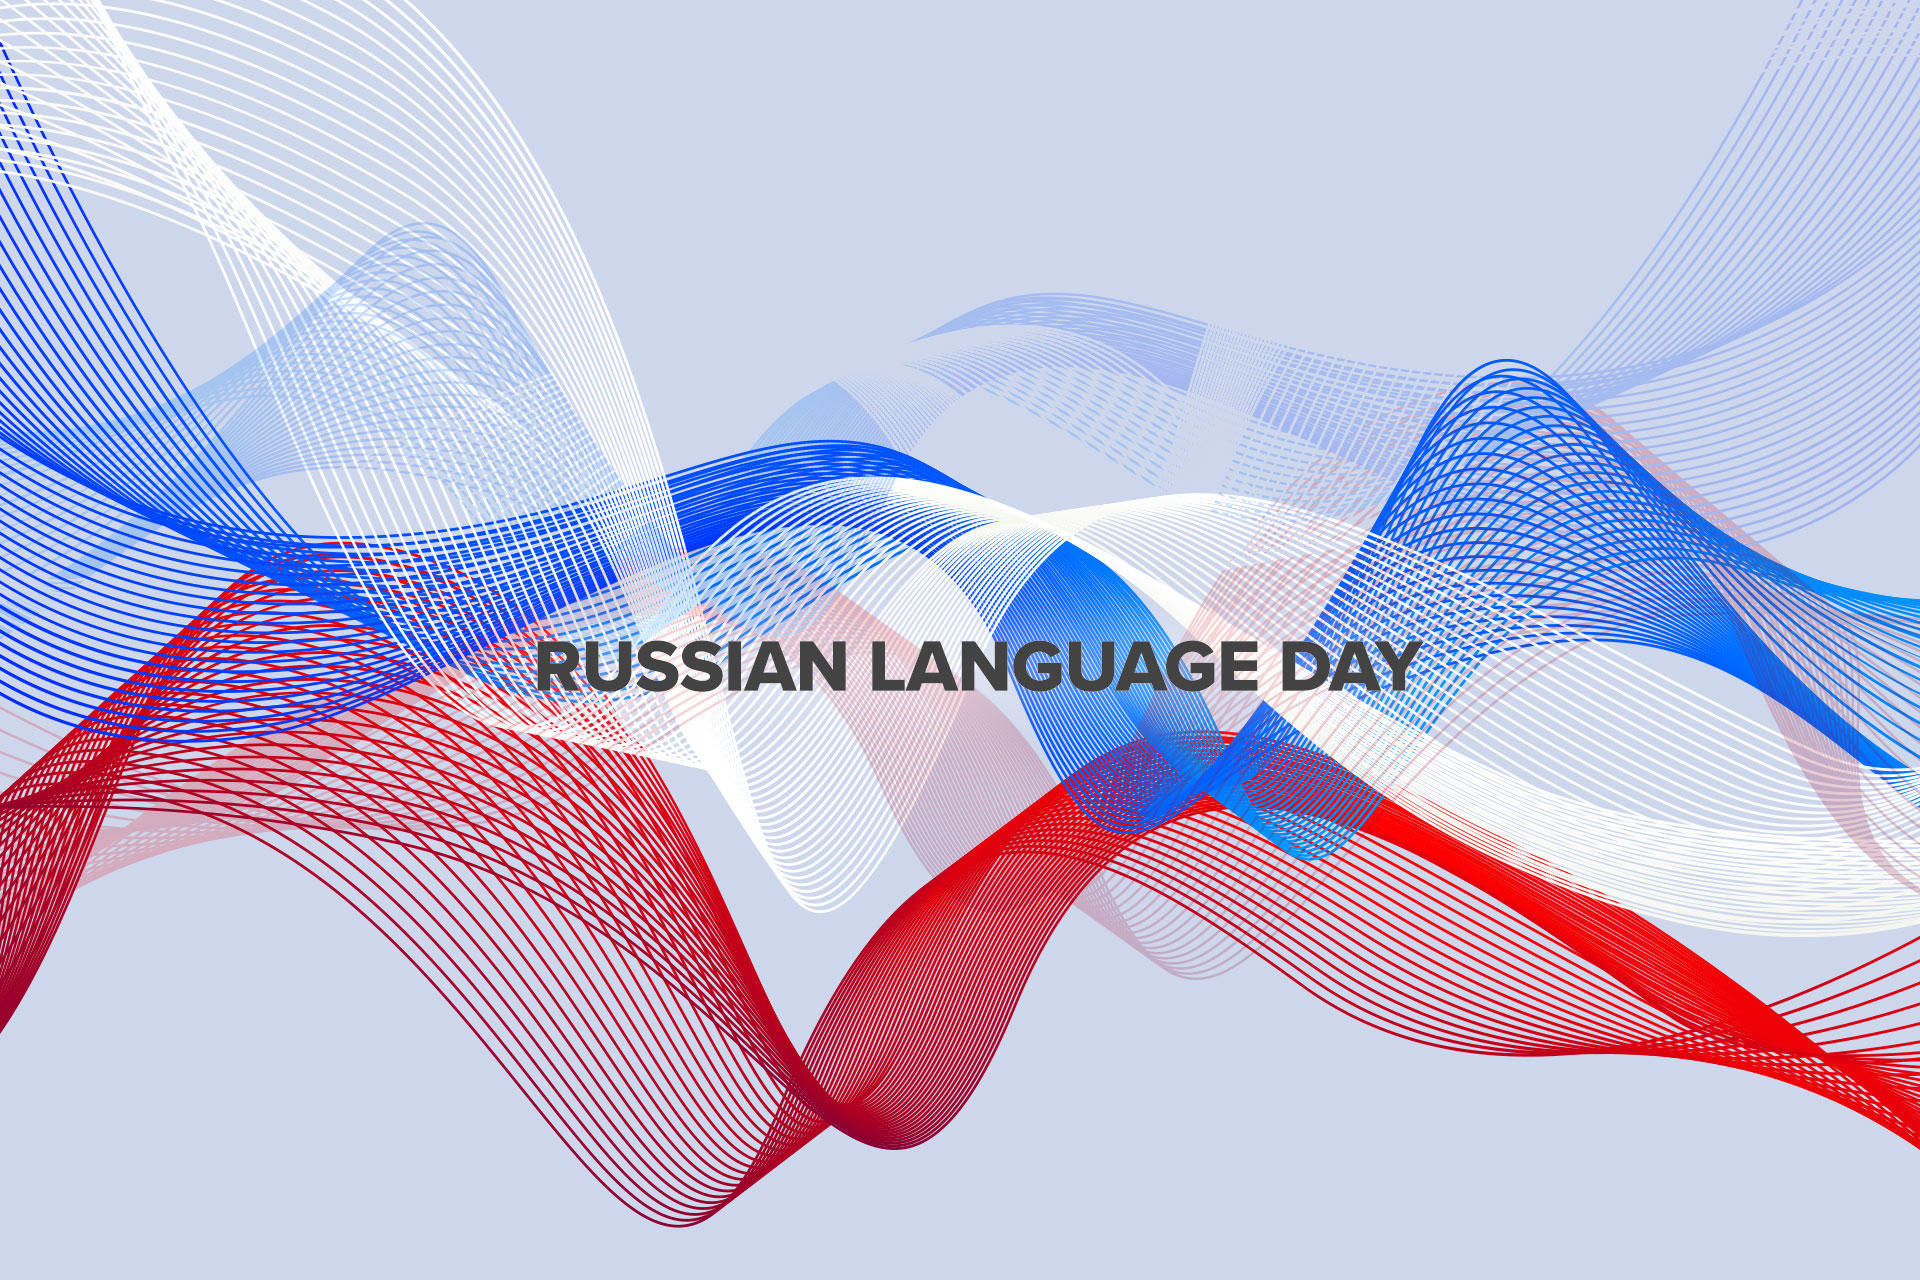 Russian Language Day 2022 Observed on 6th June